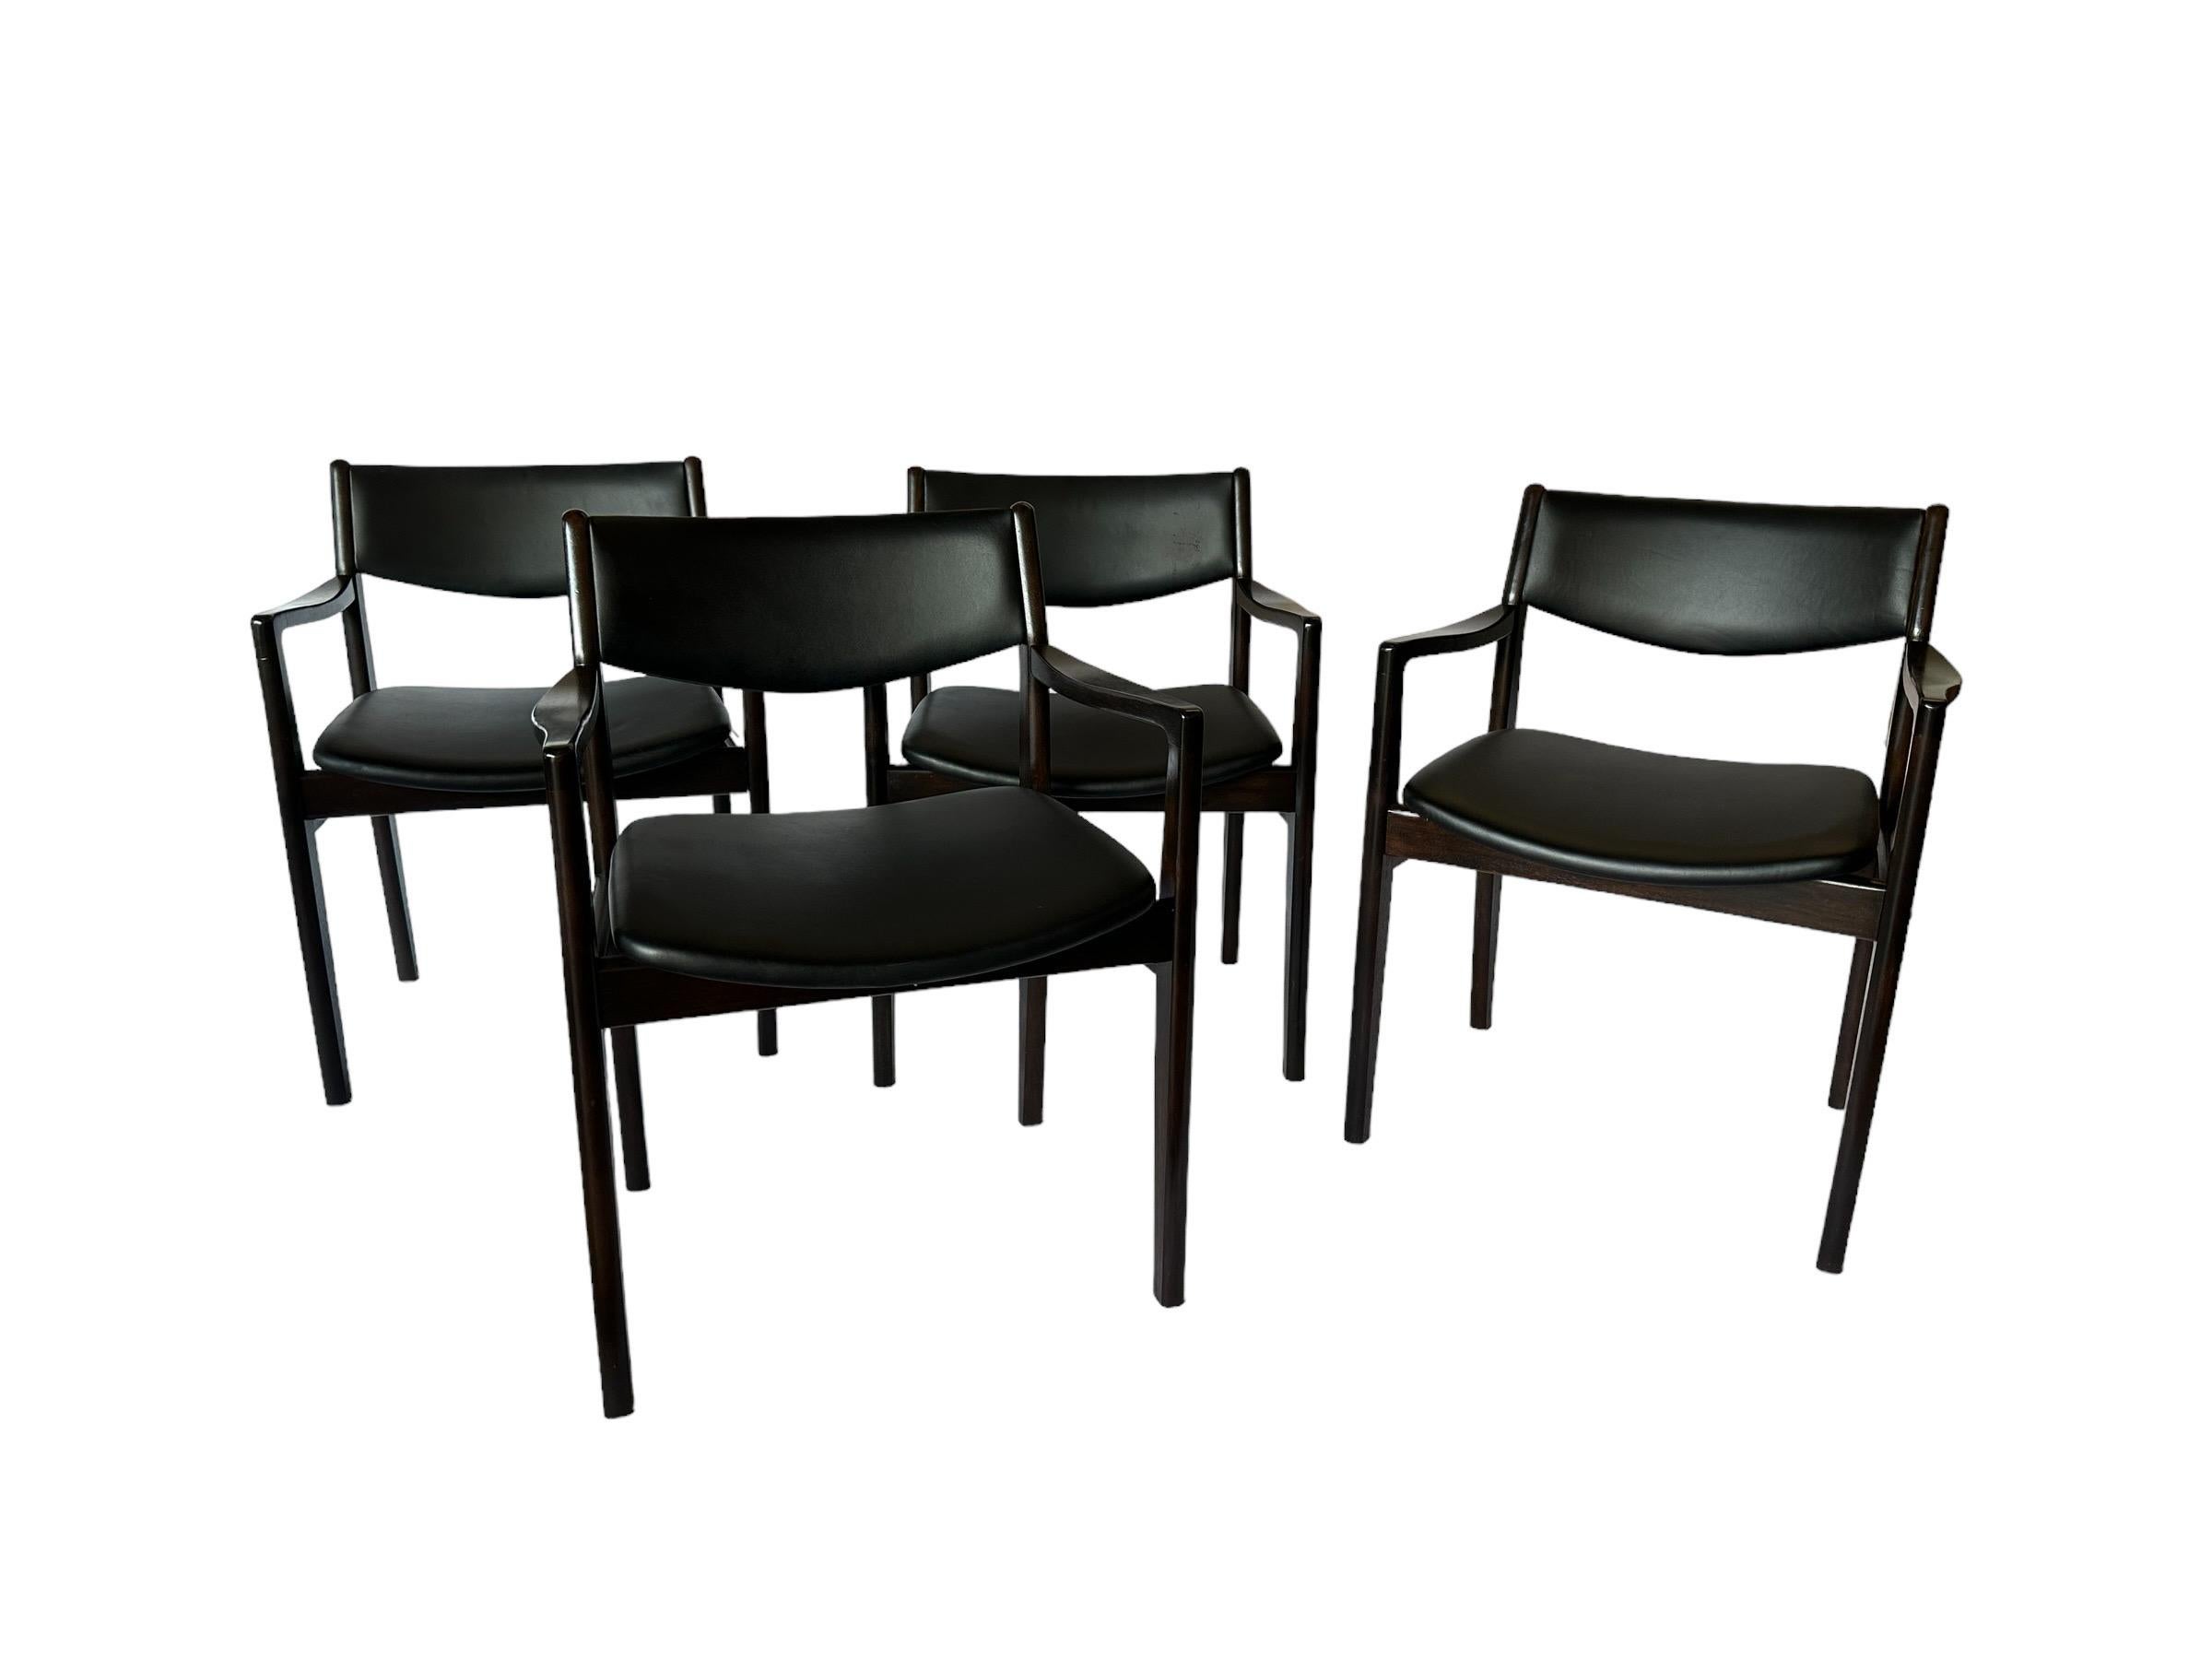 Set of four midcentury modern dining chairs. All matching chairs constructed of hardwood and evenly toned to a dark rosewood hue. Original naugahyde upholstery dyed black. In overall even condition. No tears in the textile or breaks in the wood.